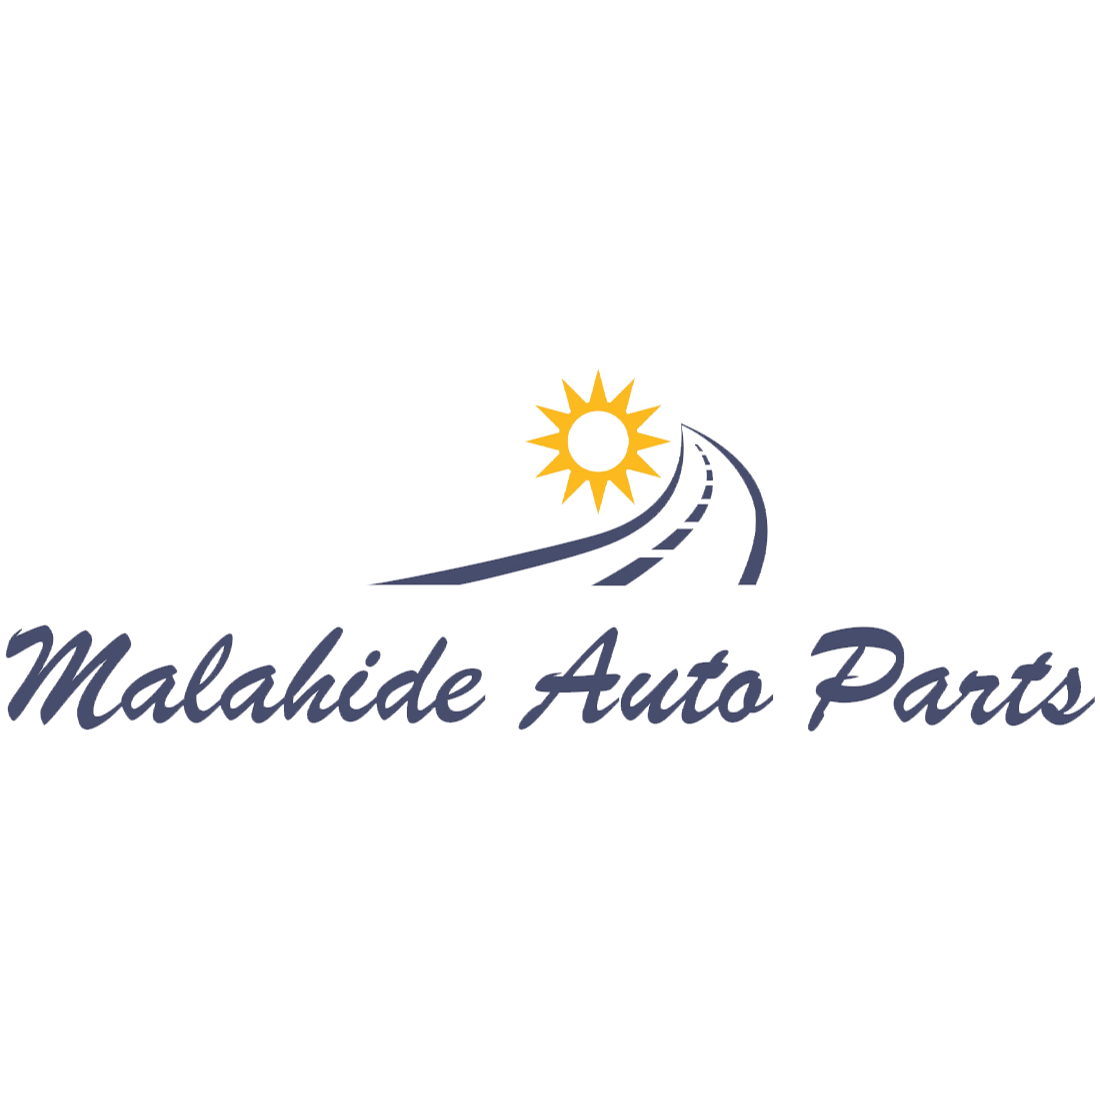 Malahide Auto Parts and Electrical Ltd. - New Auto Parts & Supplies